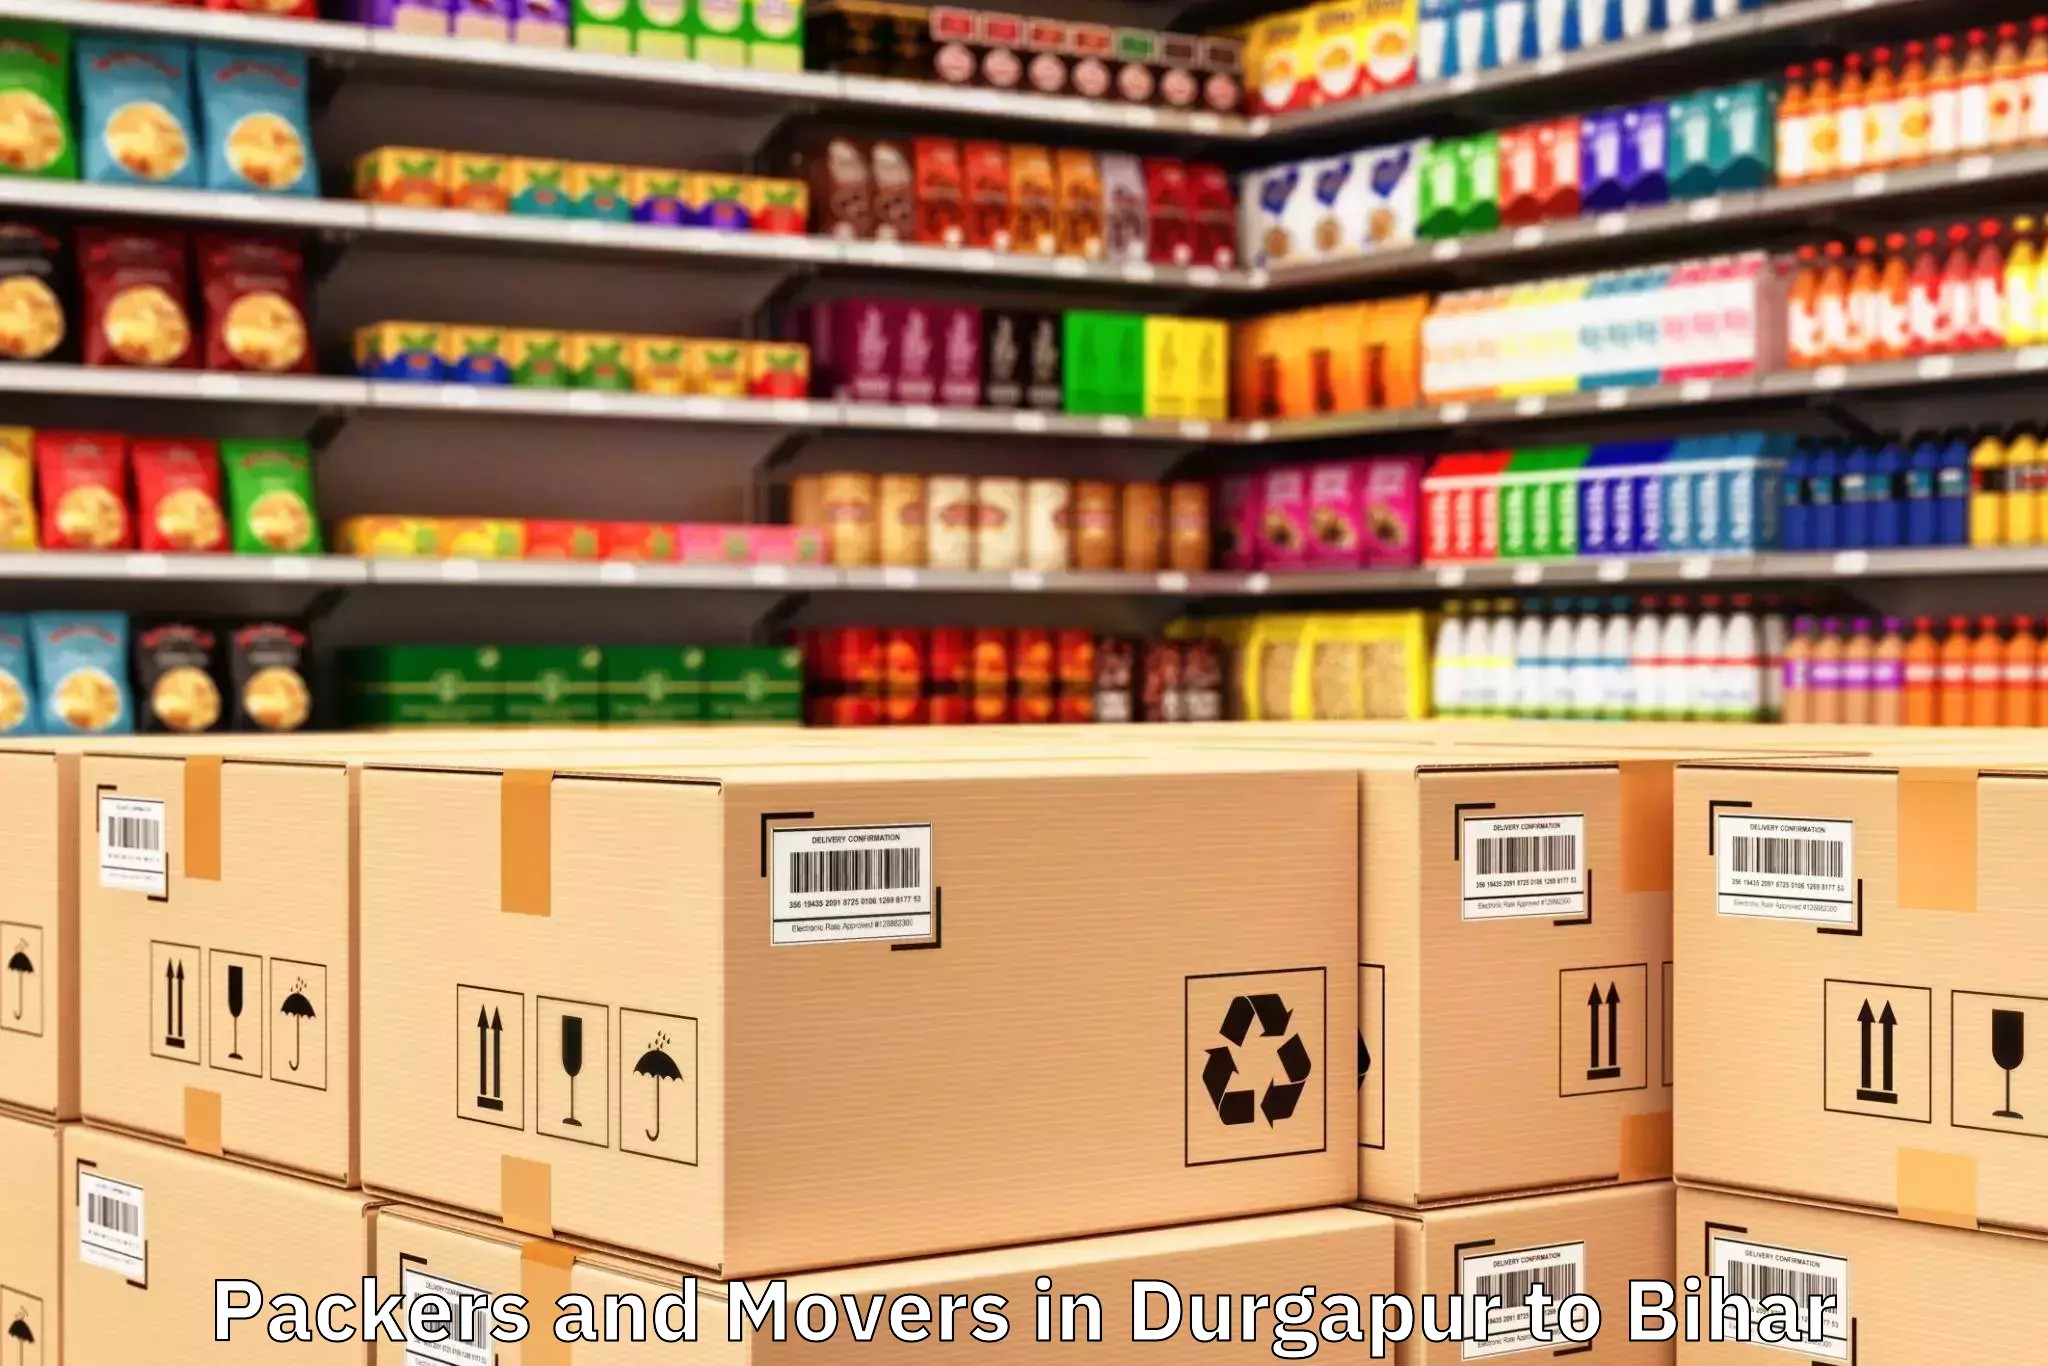 Efficient Durgapur to Sonbhadra Banshi Suryapur Packers And Movers